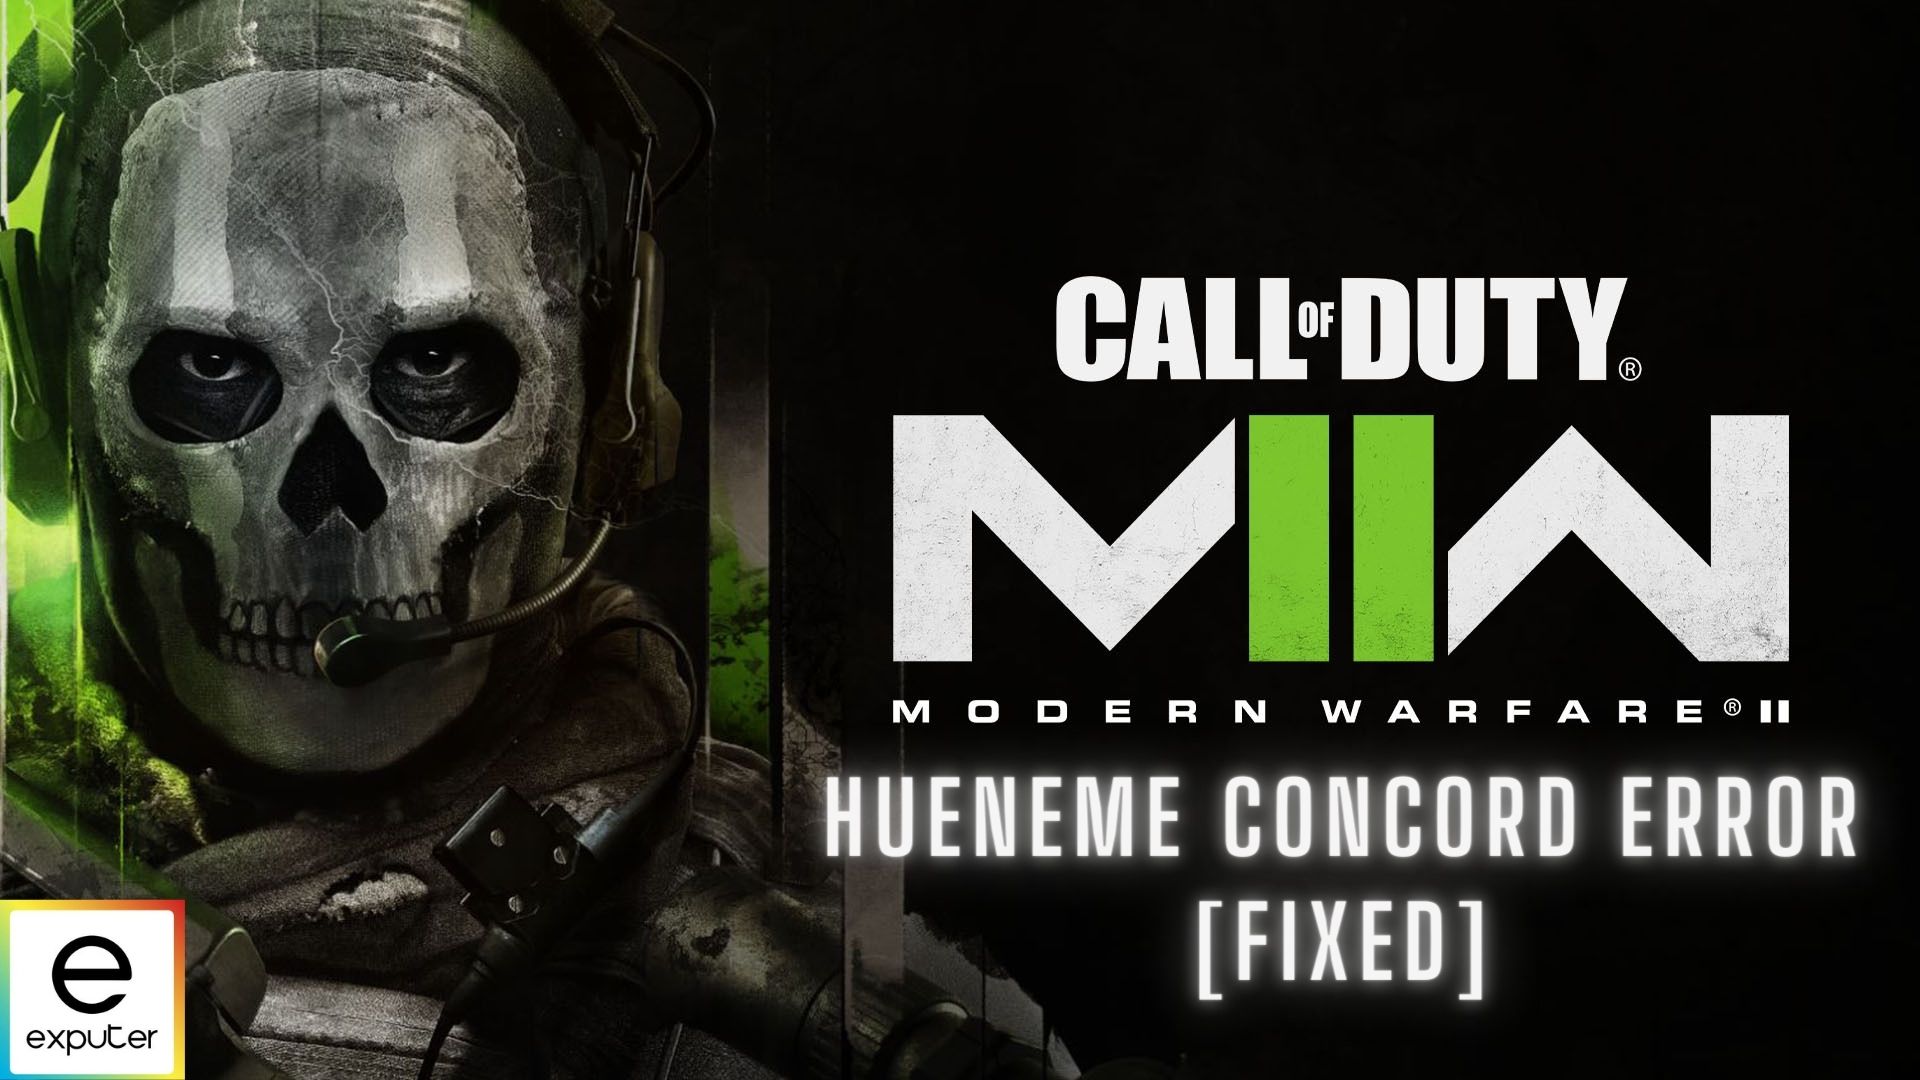 How to fix Call of Duty: Modern Warfare 2 connection issues like error  HUENEME - CONCORD